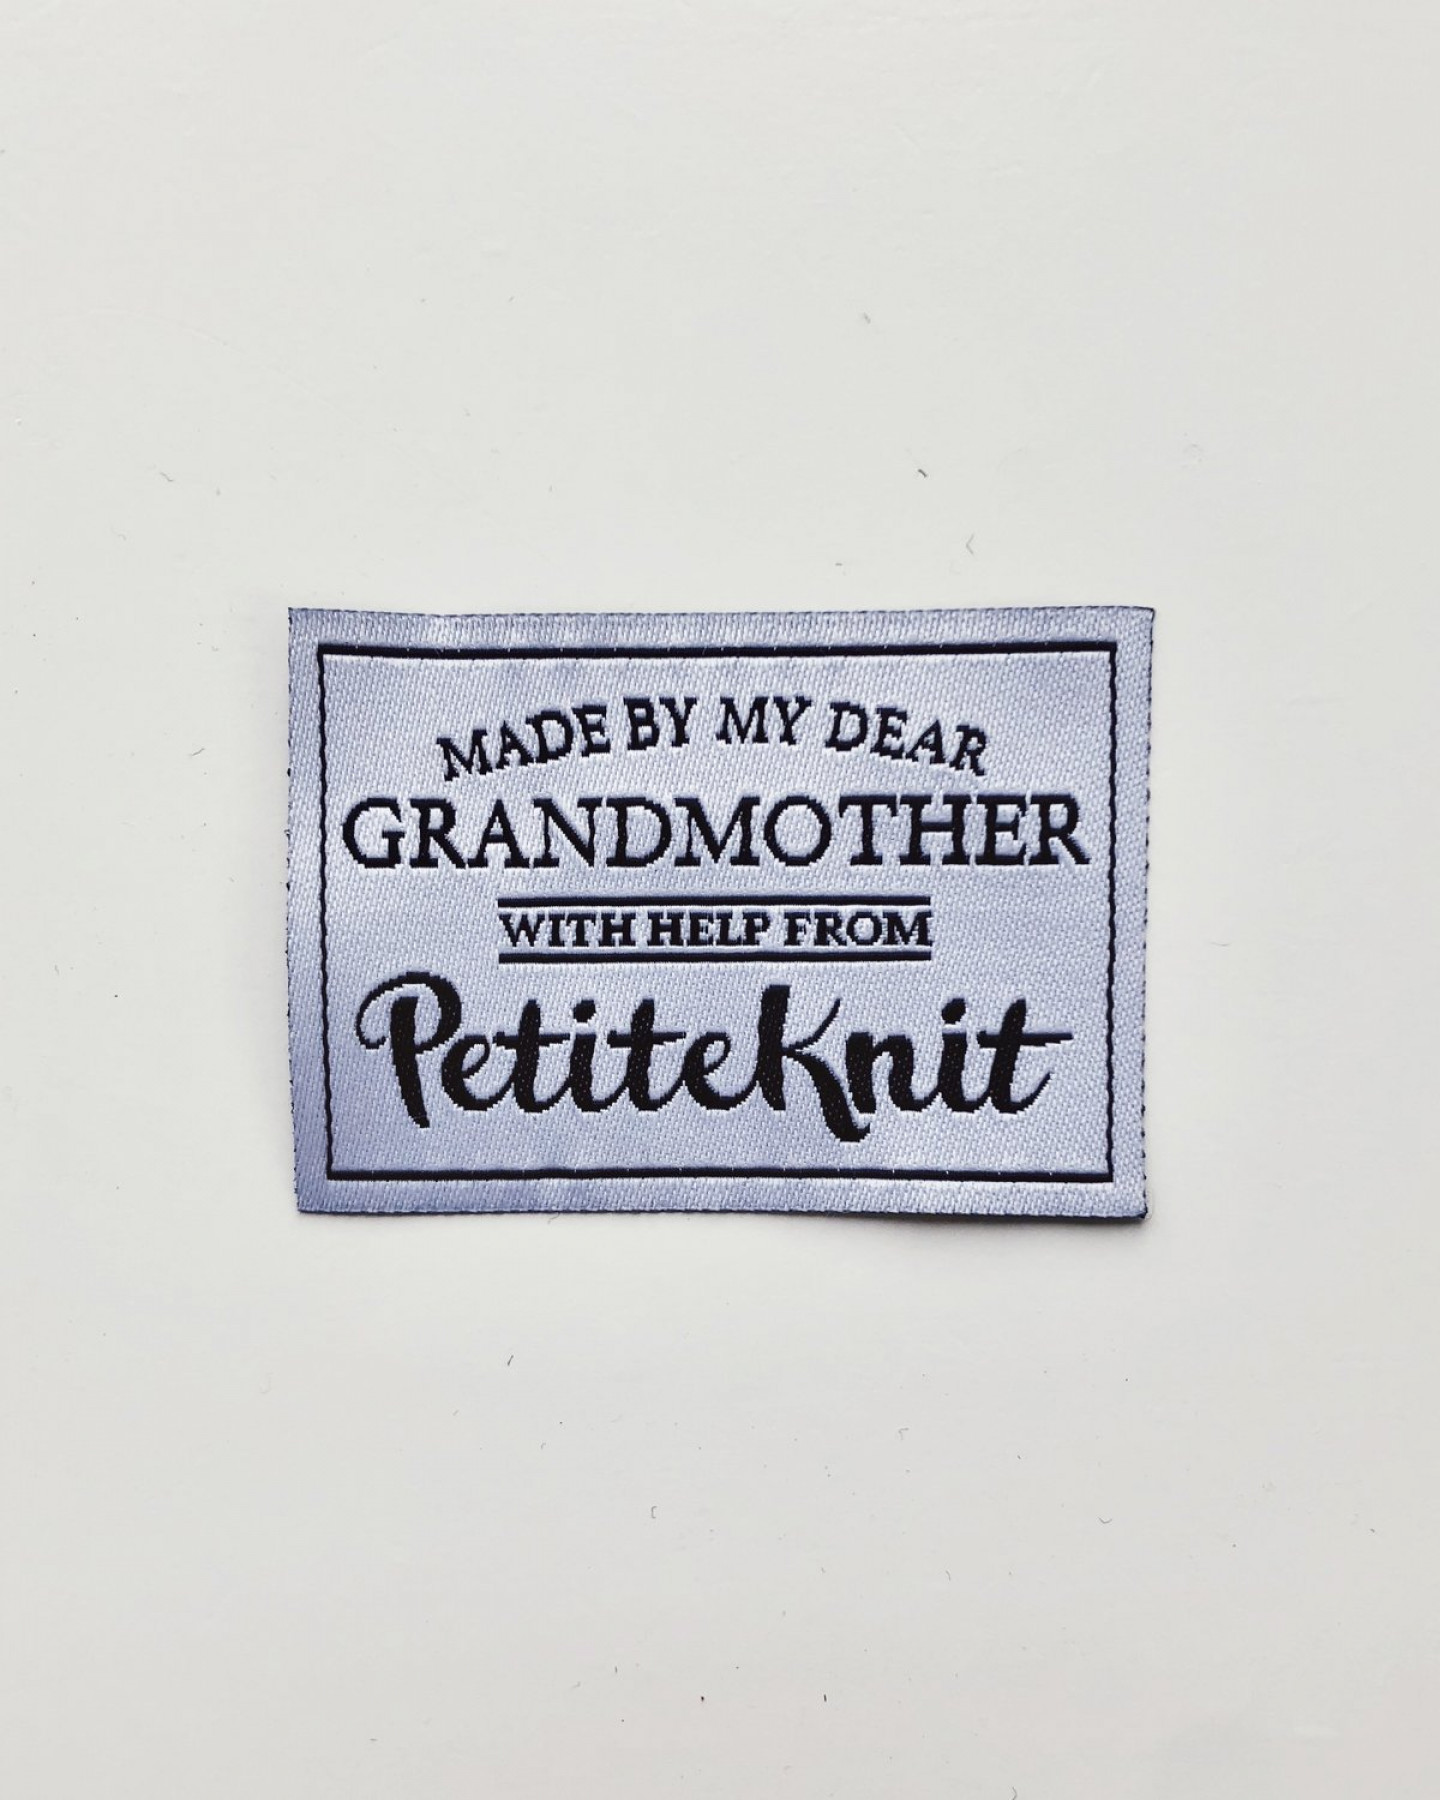 "Made By My Dear Grandmother" by PetiteKnit -label